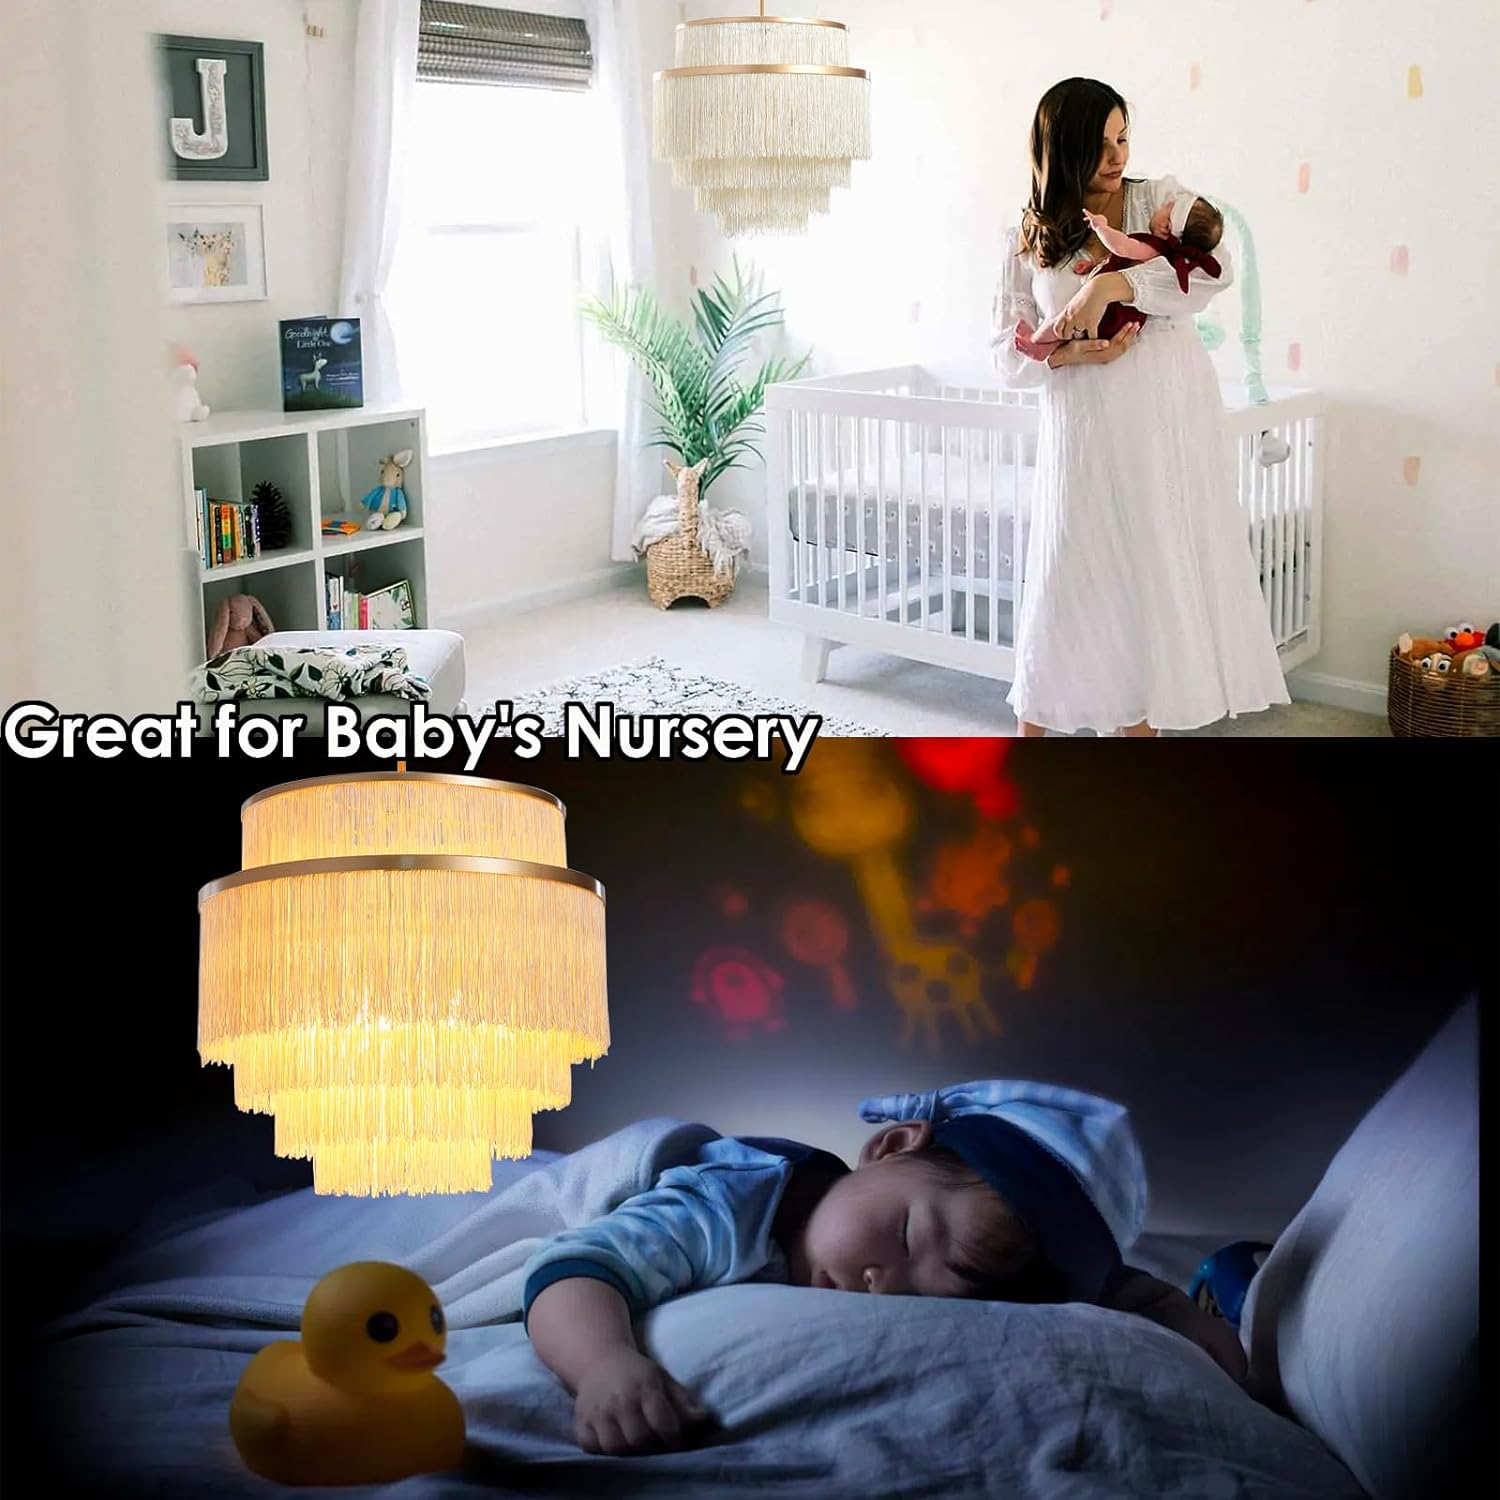 Size of nursery decides size of chandelier